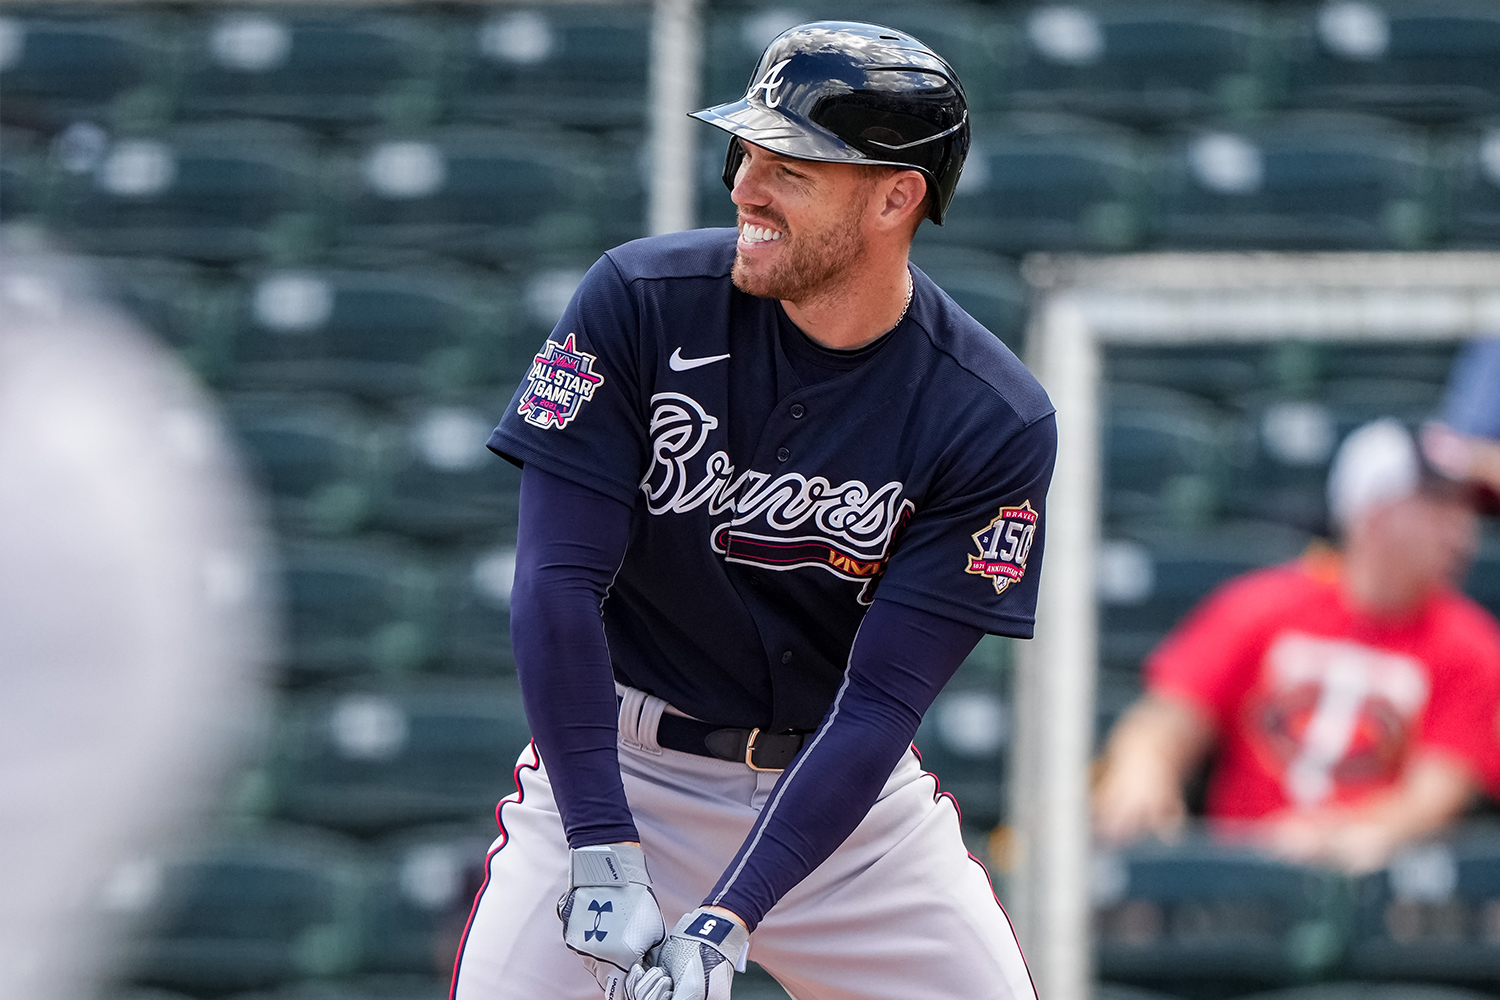 Freddie Freeman #5 of the Atlanta Braves looks on and smiles during a spring training game against the Minnesota Twins